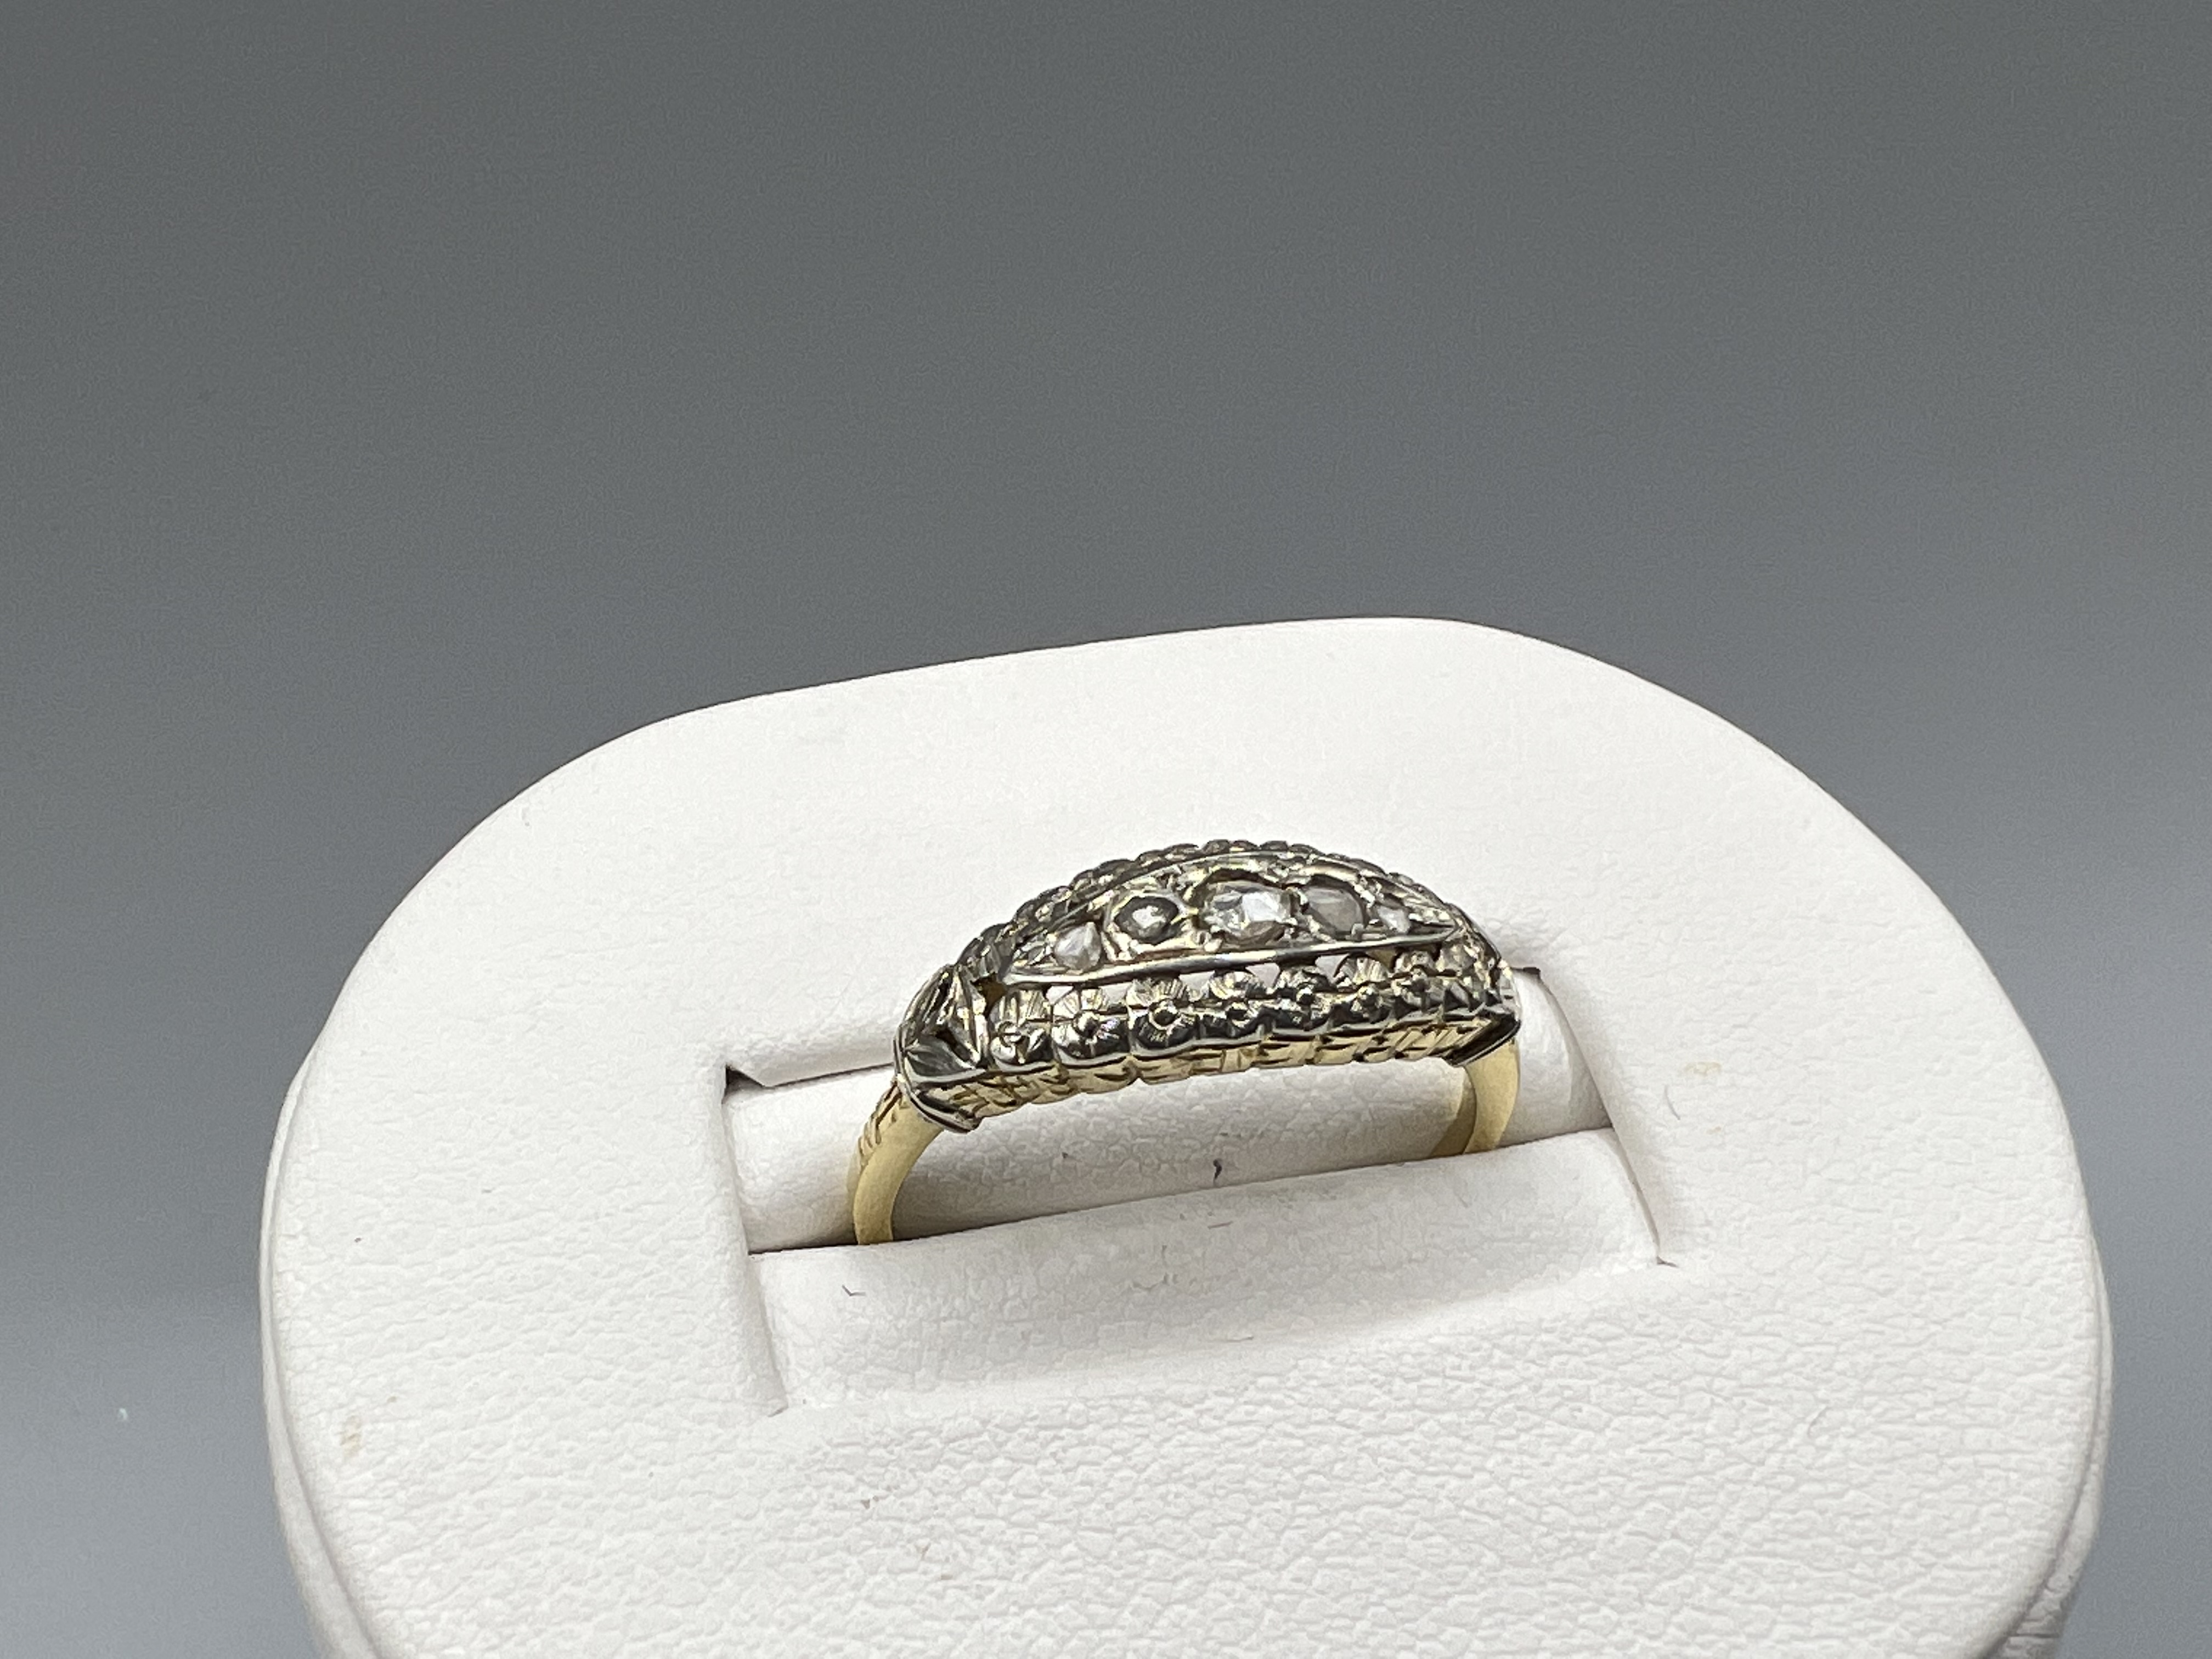 Antique 18ct Gold & Diamond Ring - Size P 2.6g - Image 2 of 3